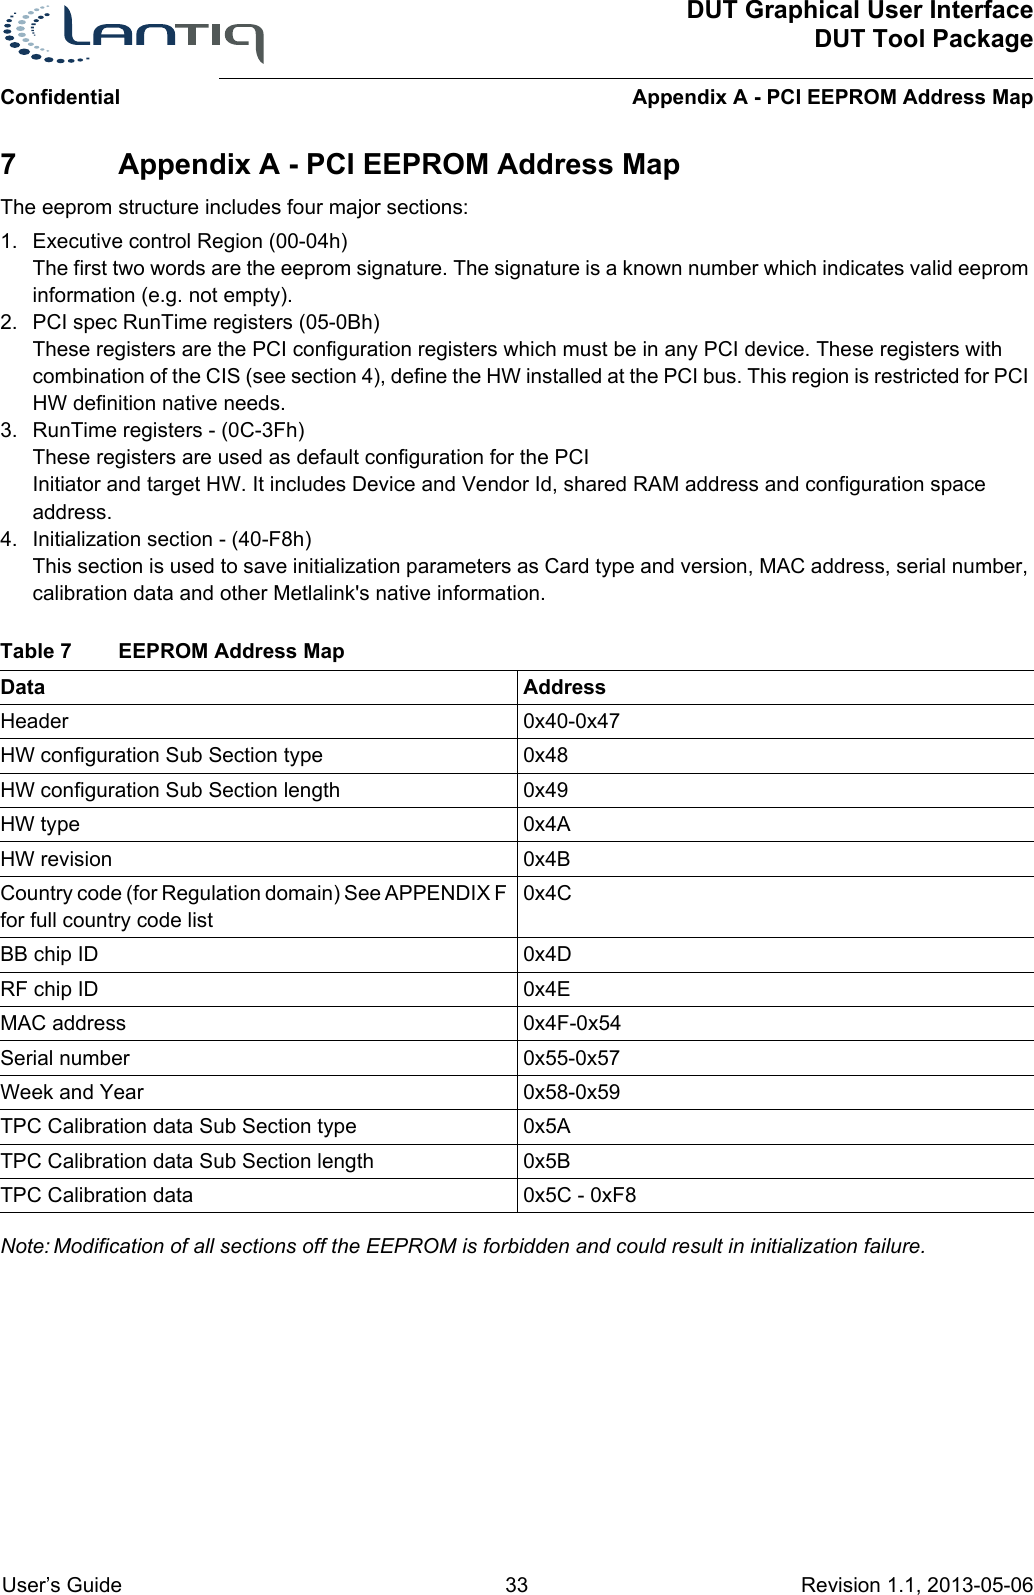 DUT Graphical User InterfaceDUT Tool PackageAppendix A - PCI EEPROM Address MapConfidential User’s Guide 33 Revision 1.1, 2013-05-06      7 Appendix A - PCI EEPROM Address MapThe eeprom structure includes four major sections:1. Executive control Region (00-04h) The first two words are the eeprom signature. The signature is a known number which indicates valid eeprom information (e.g. not empty).2. PCI spec RunTime registers (05-0Bh)These registers are the PCI configuration registers which must be in any PCI device. These registers with combination of the CIS (see section 4), define the HW installed at the PCI bus. This region is restricted for PCI HW definition native needs. 3. RunTime registers - (0C-3Fh)These registers are used as default configuration for the PCI  Initiator and target HW. It includes Device and Vendor Id, shared RAM address and configuration space address. 4. Initialization section - (40-F8h)This section is used to save initialization parameters as Card type and version, MAC address, serial number, calibration data and other Metlalink&apos;s native information. Data AddressHeader  0x40-0x47HW configuration Sub Section type  0x48HW configuration Sub Section length 0x49HW type 0x4AHW revision 0x4BCountry code (for Regulation domain) See APPENDIX F for full country code list0x4CBB chip ID 0x4DRF chip ID 0x4EMAC address 0x4F-0x54Serial number 0x55-0x57Week and Year 0x58-0x59TPC Calibration data Sub Section type  0x5ATPC Calibration data Sub Section length 0x5BTPC Calibration data 0x5C - 0xF8Note: Modification of all sections off the EEPROM is forbidden and could result in initialization failure.Table 7 EEPROM Address Map 